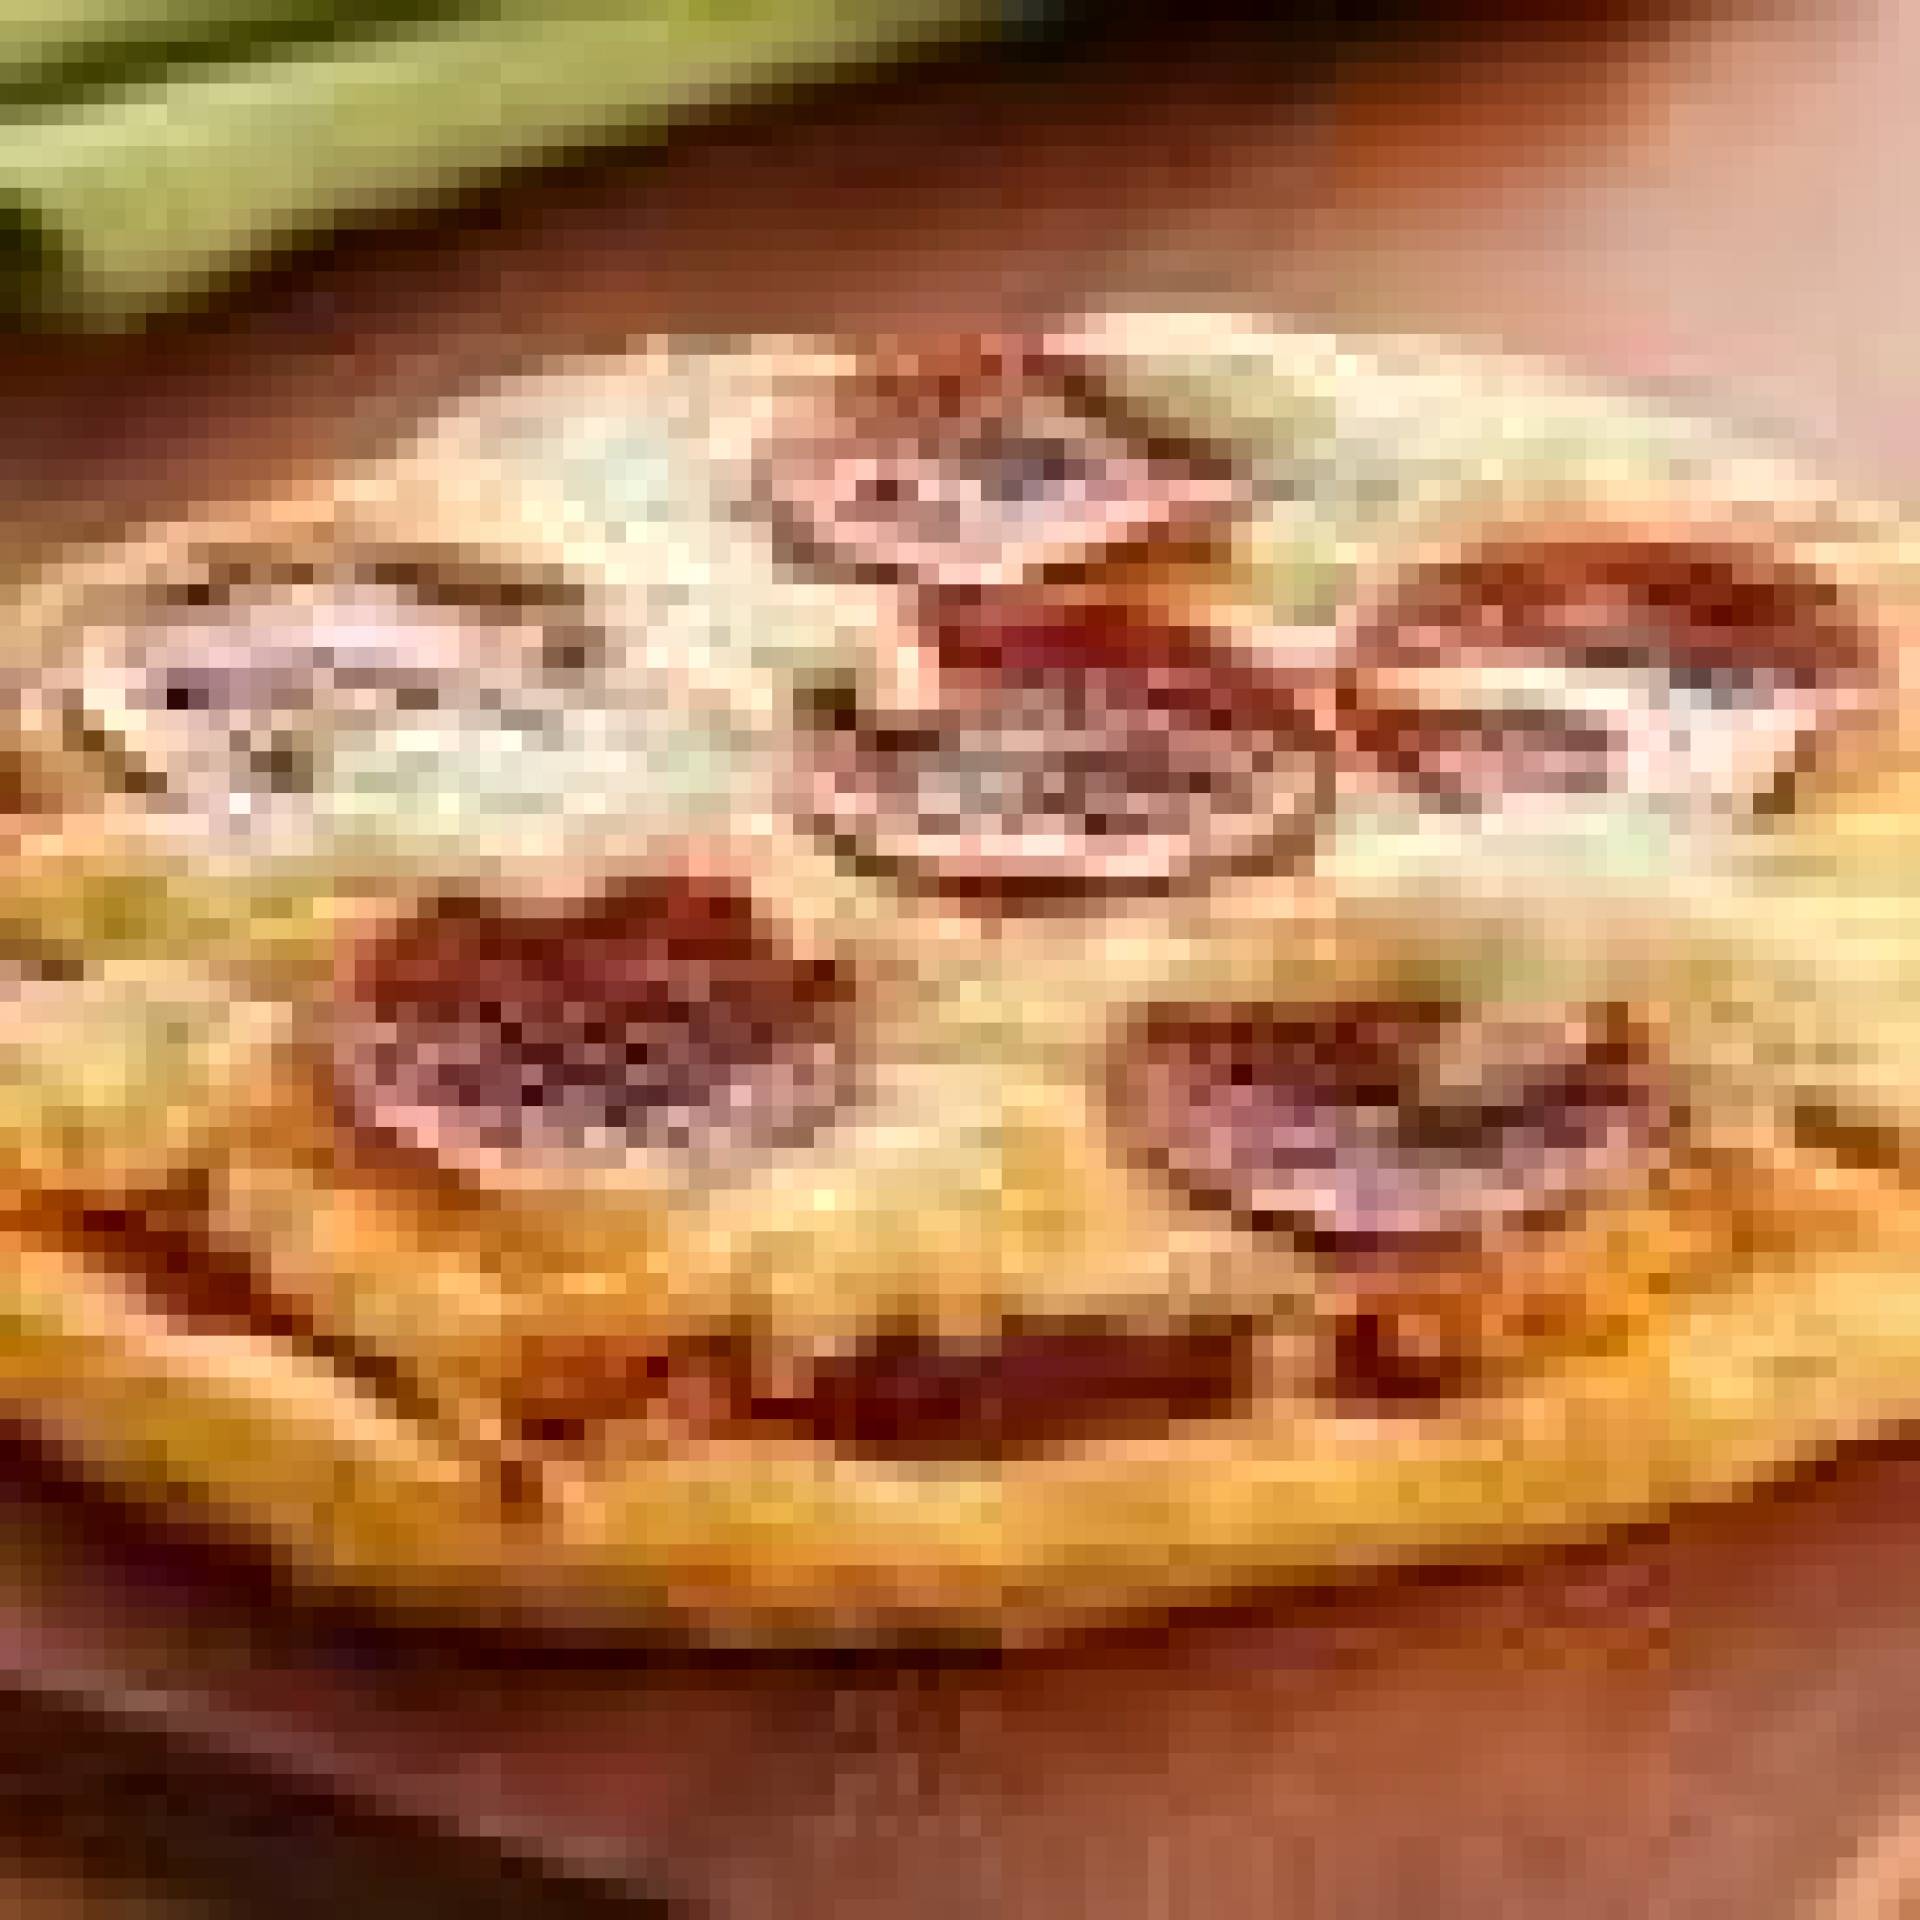 Pepperoni Pizza on a Protein Crust